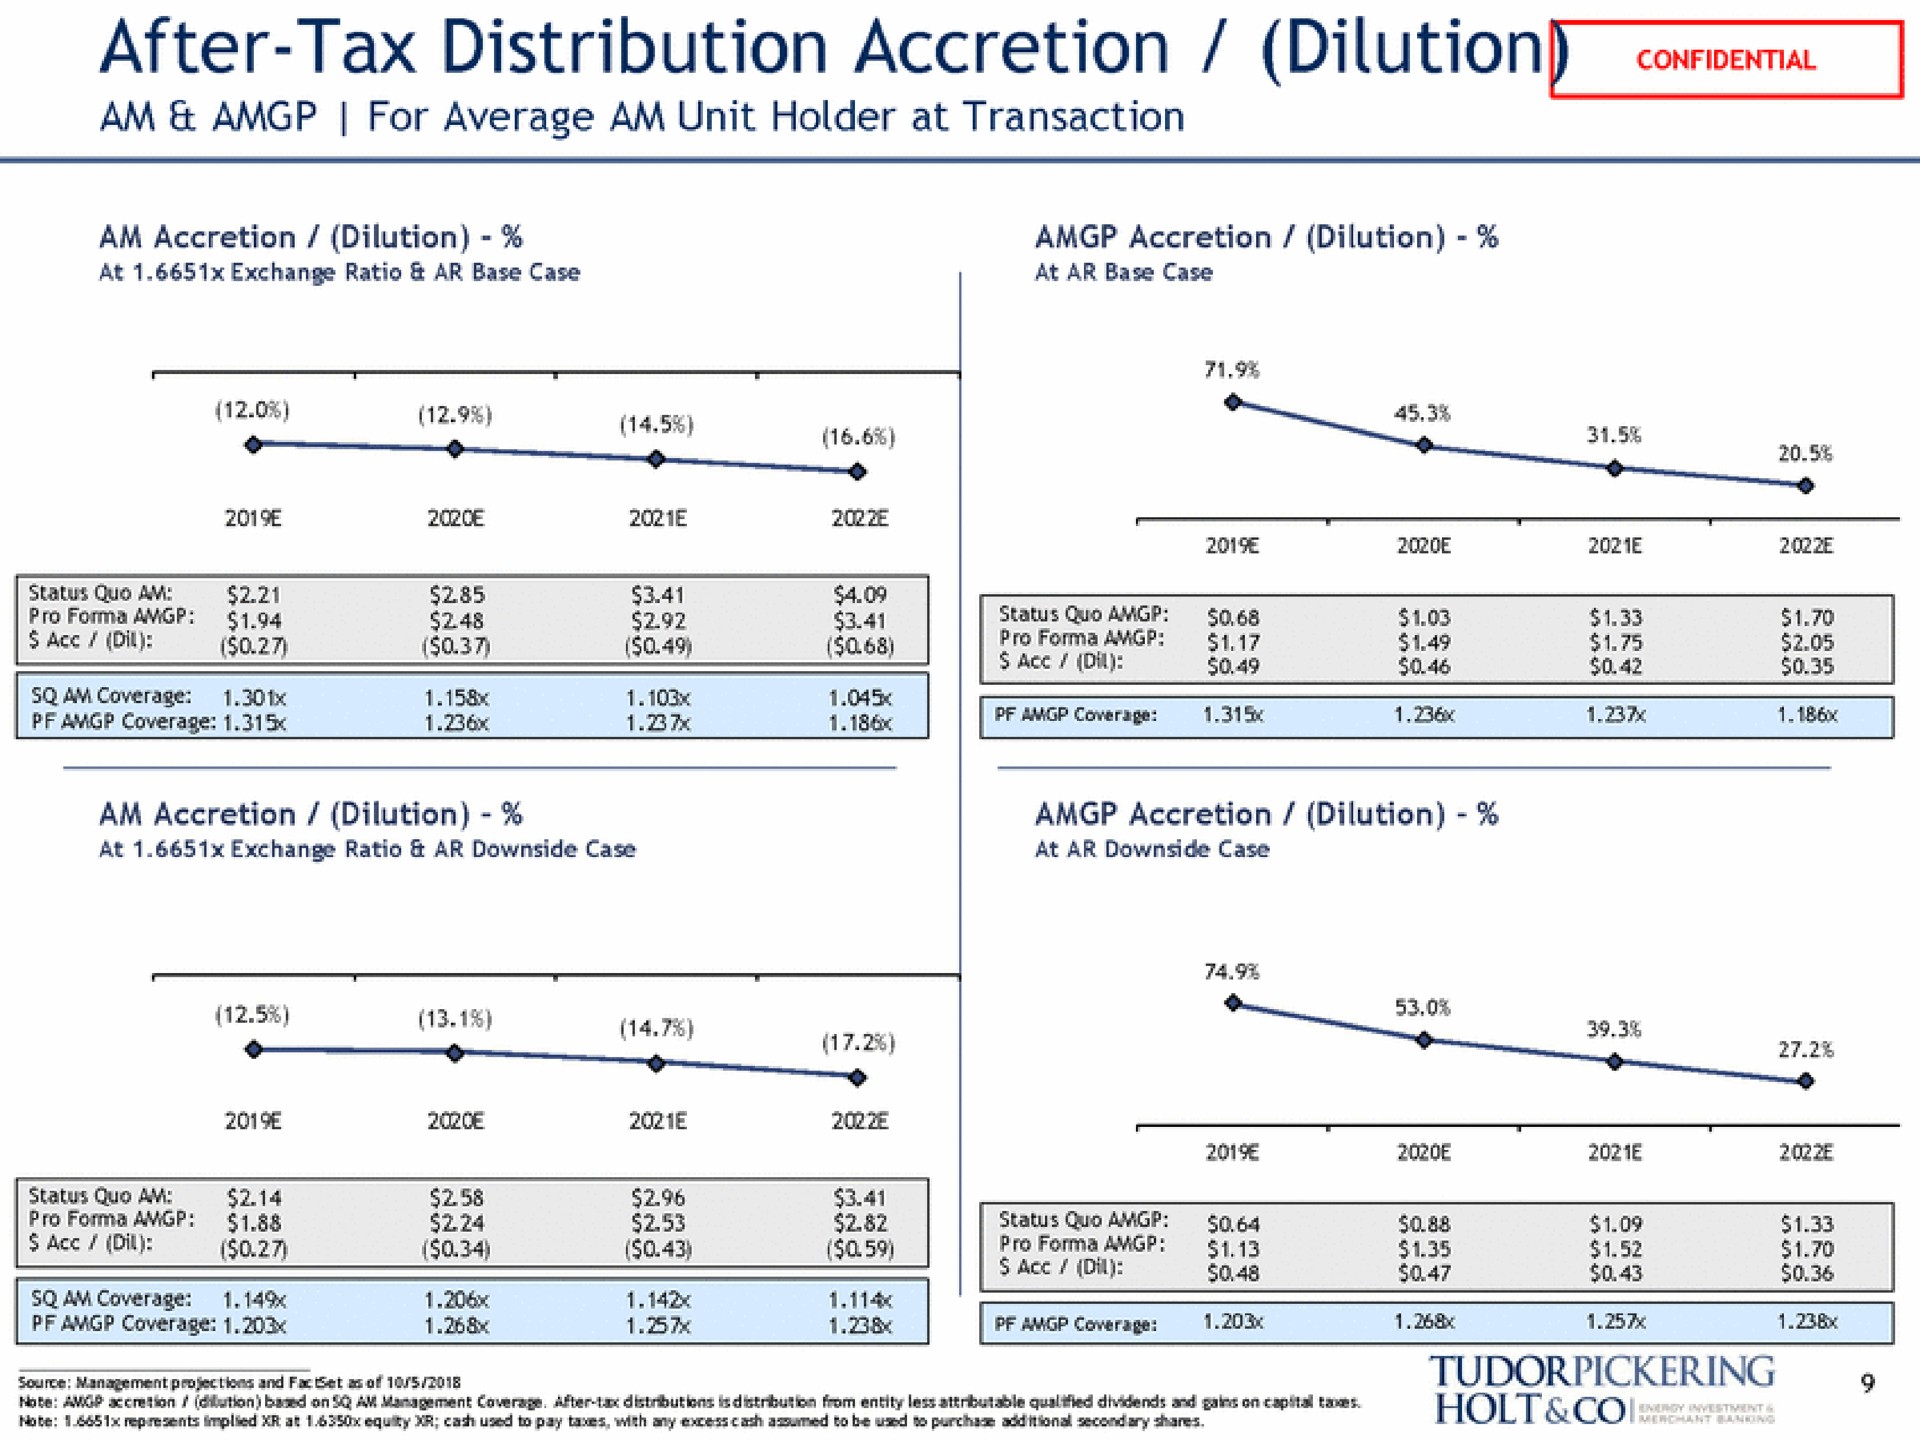 after tax distribution accretion dilution am for average am unit holder at transaction | Tudor, Pickering, Holt & Co